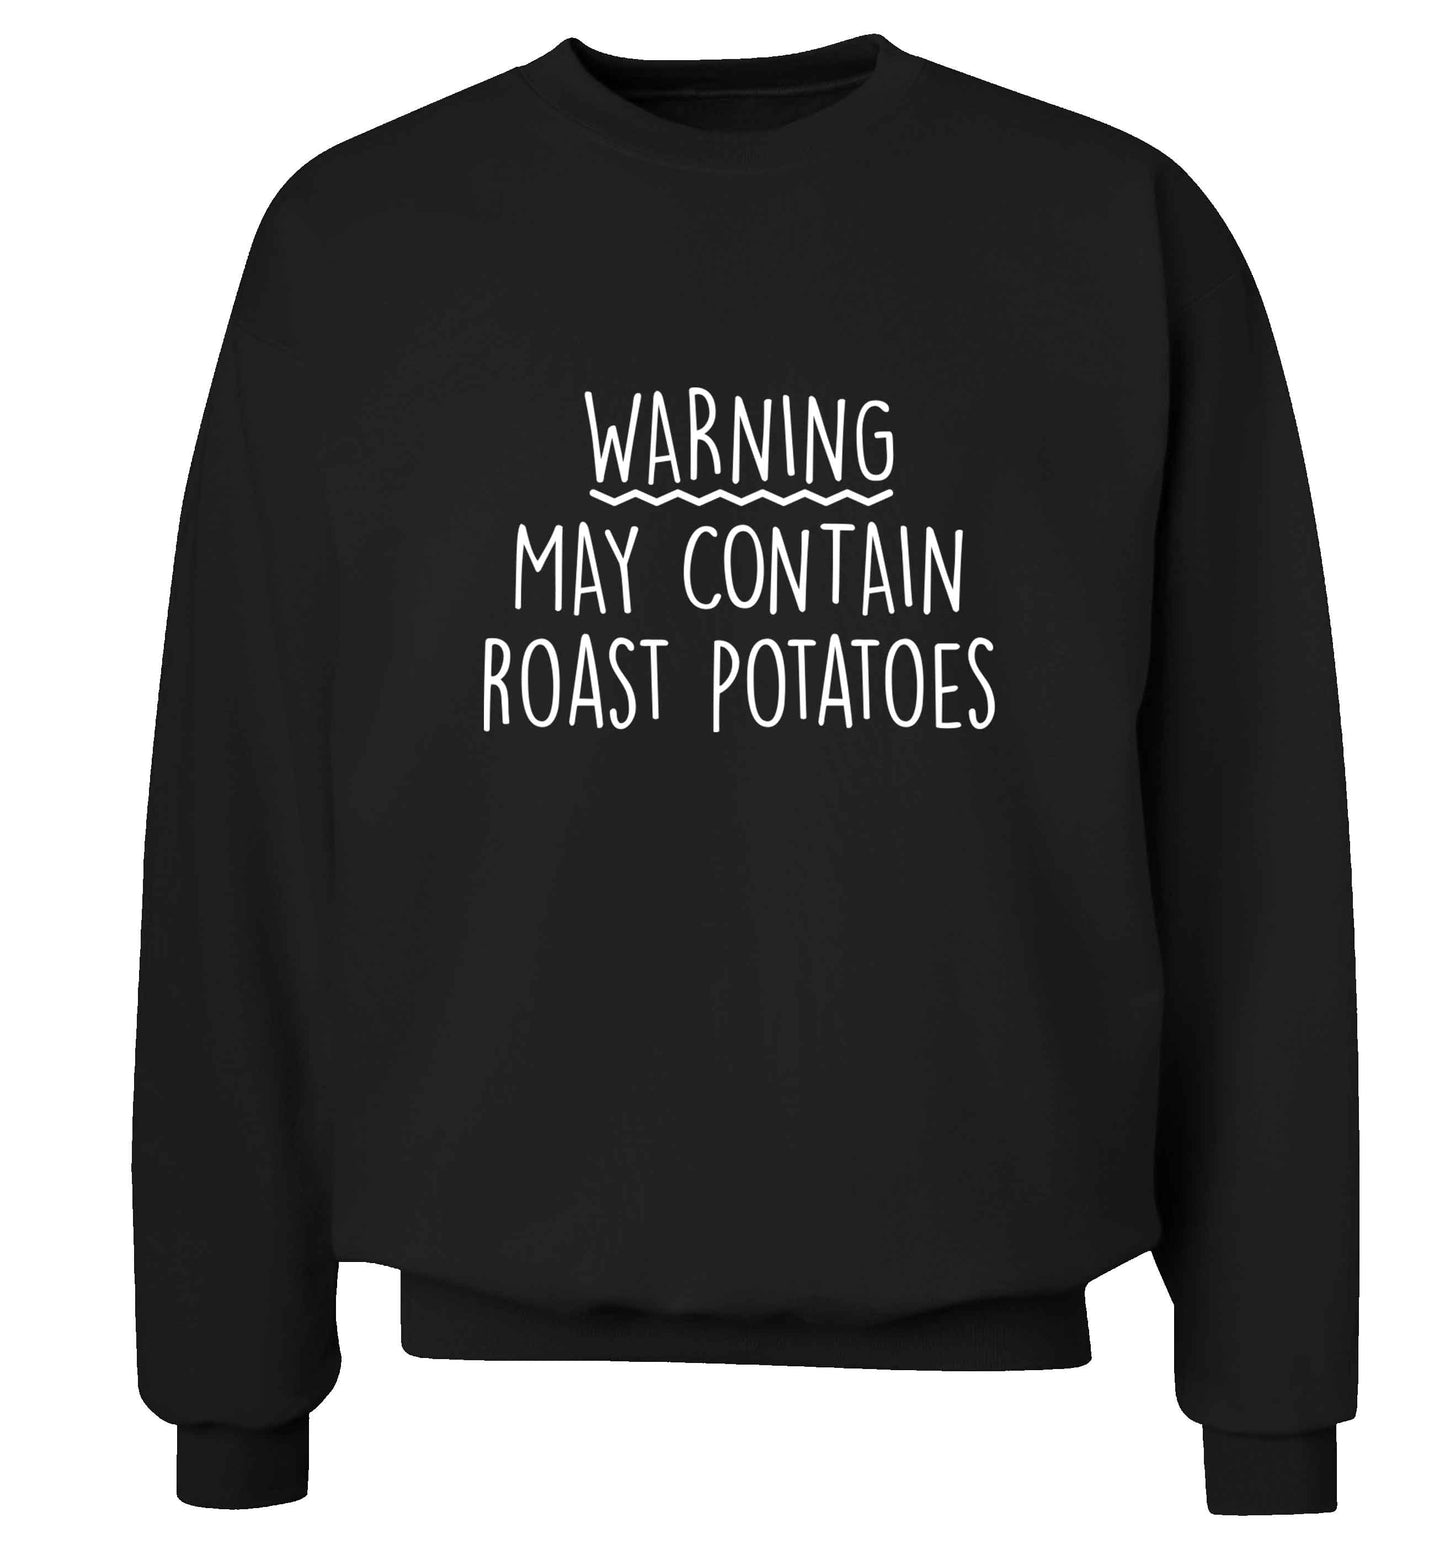 Warning may containg roast potatoes adult's unisex black sweater 2XL